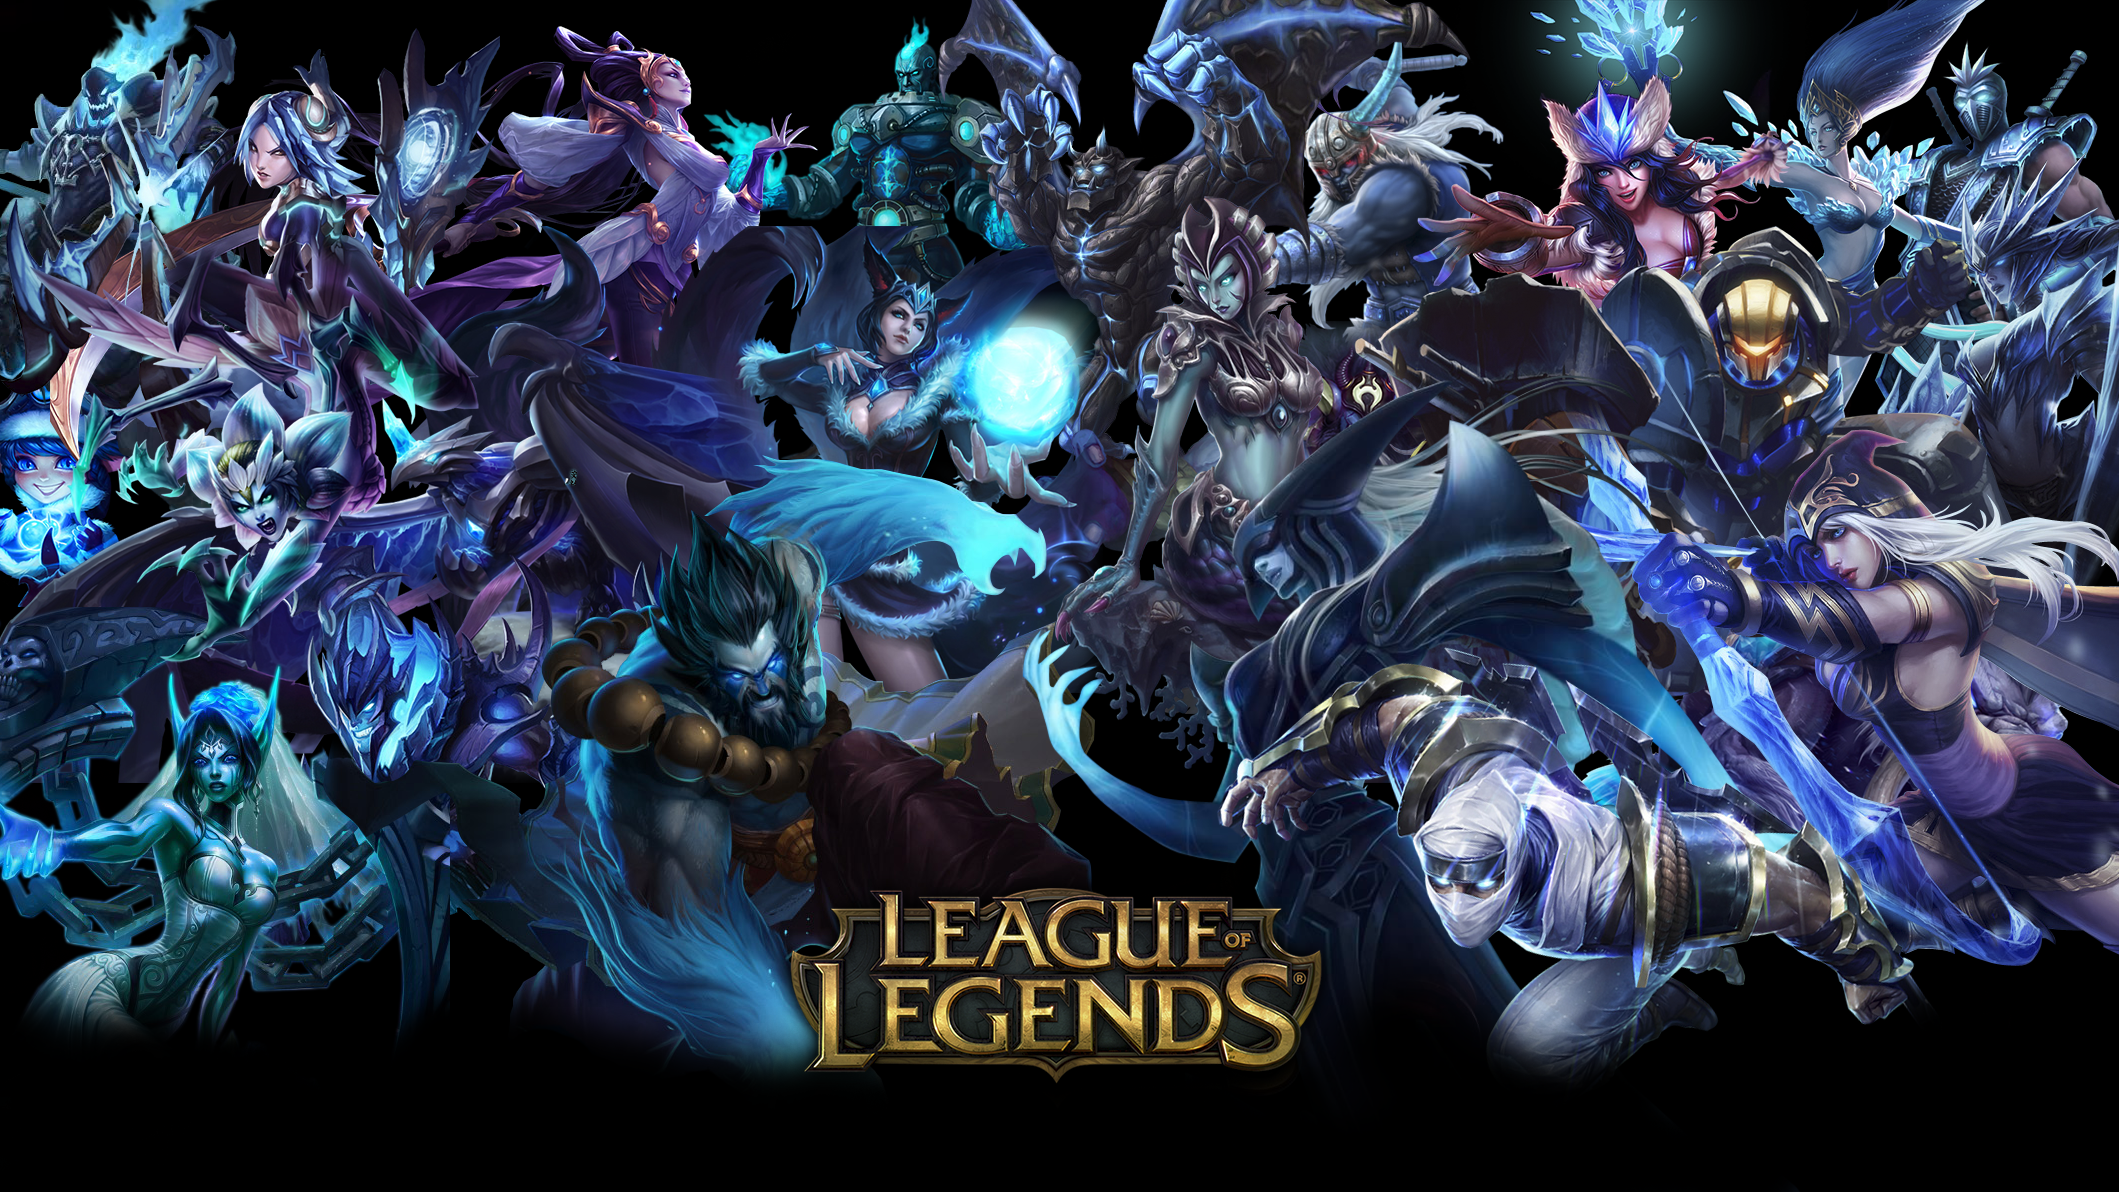 A page full of nice wallpapers of League of Legends